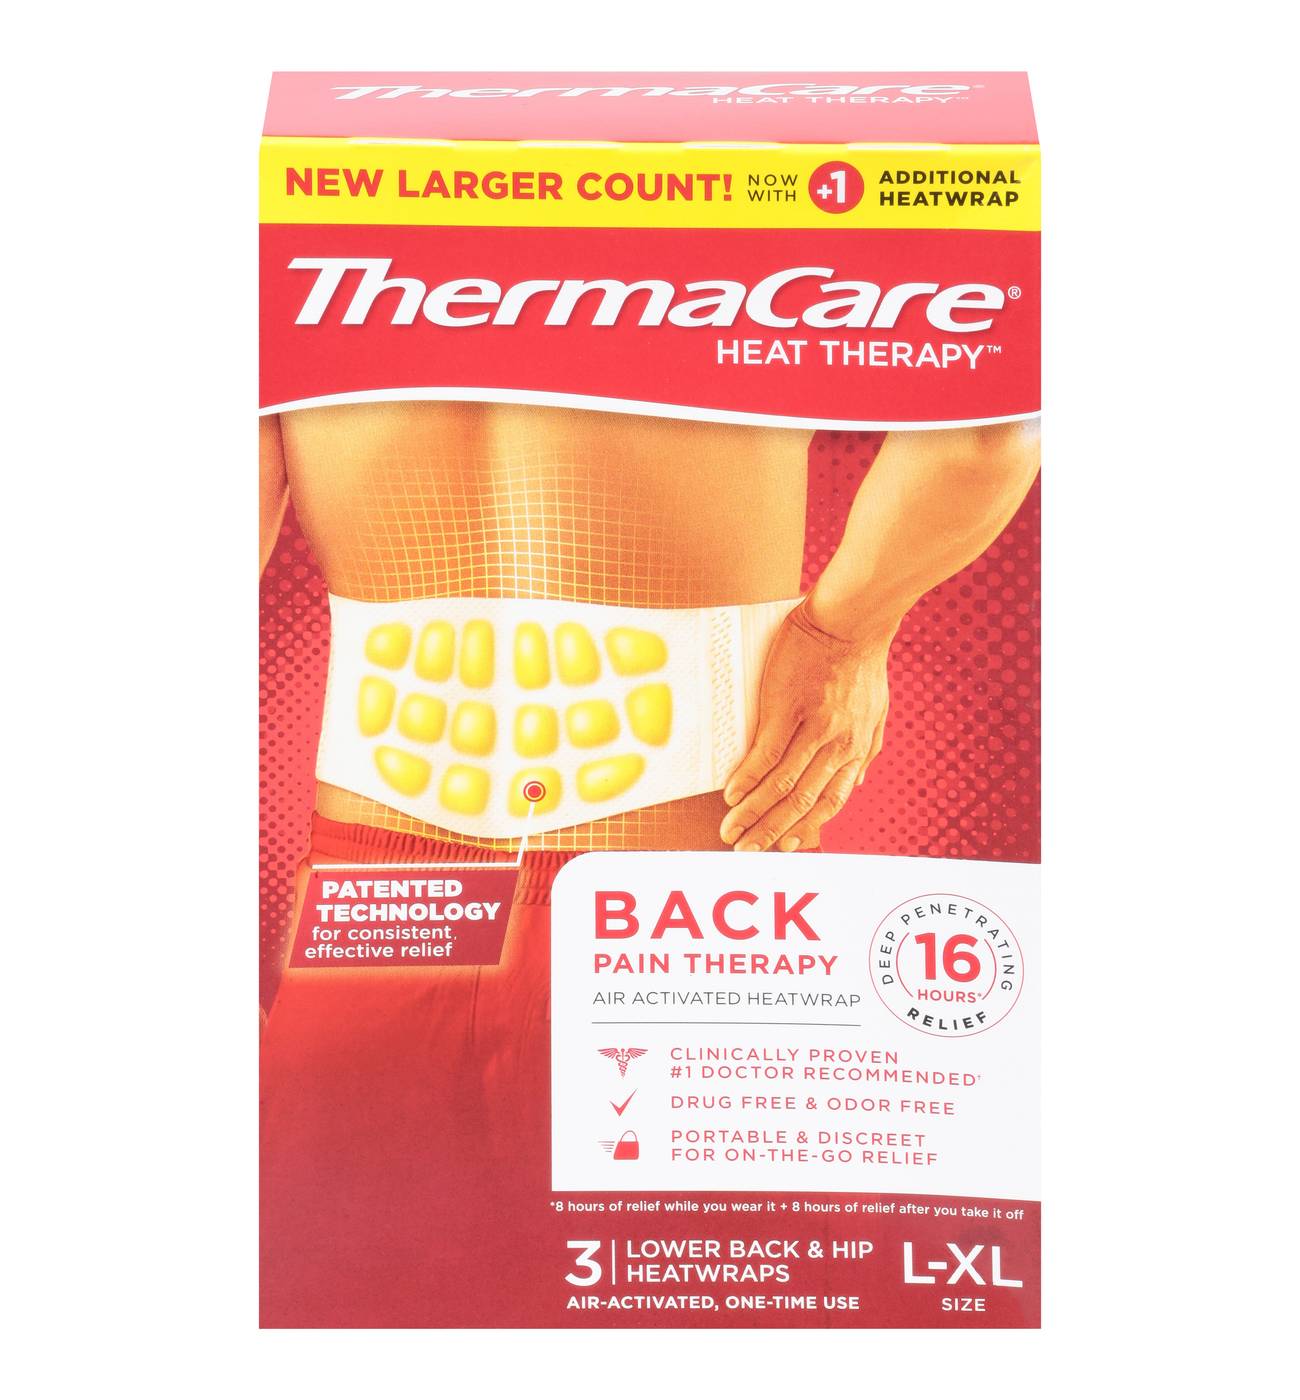 ThermaCare Back Pain Therapy Heatwraps; image 1 of 9